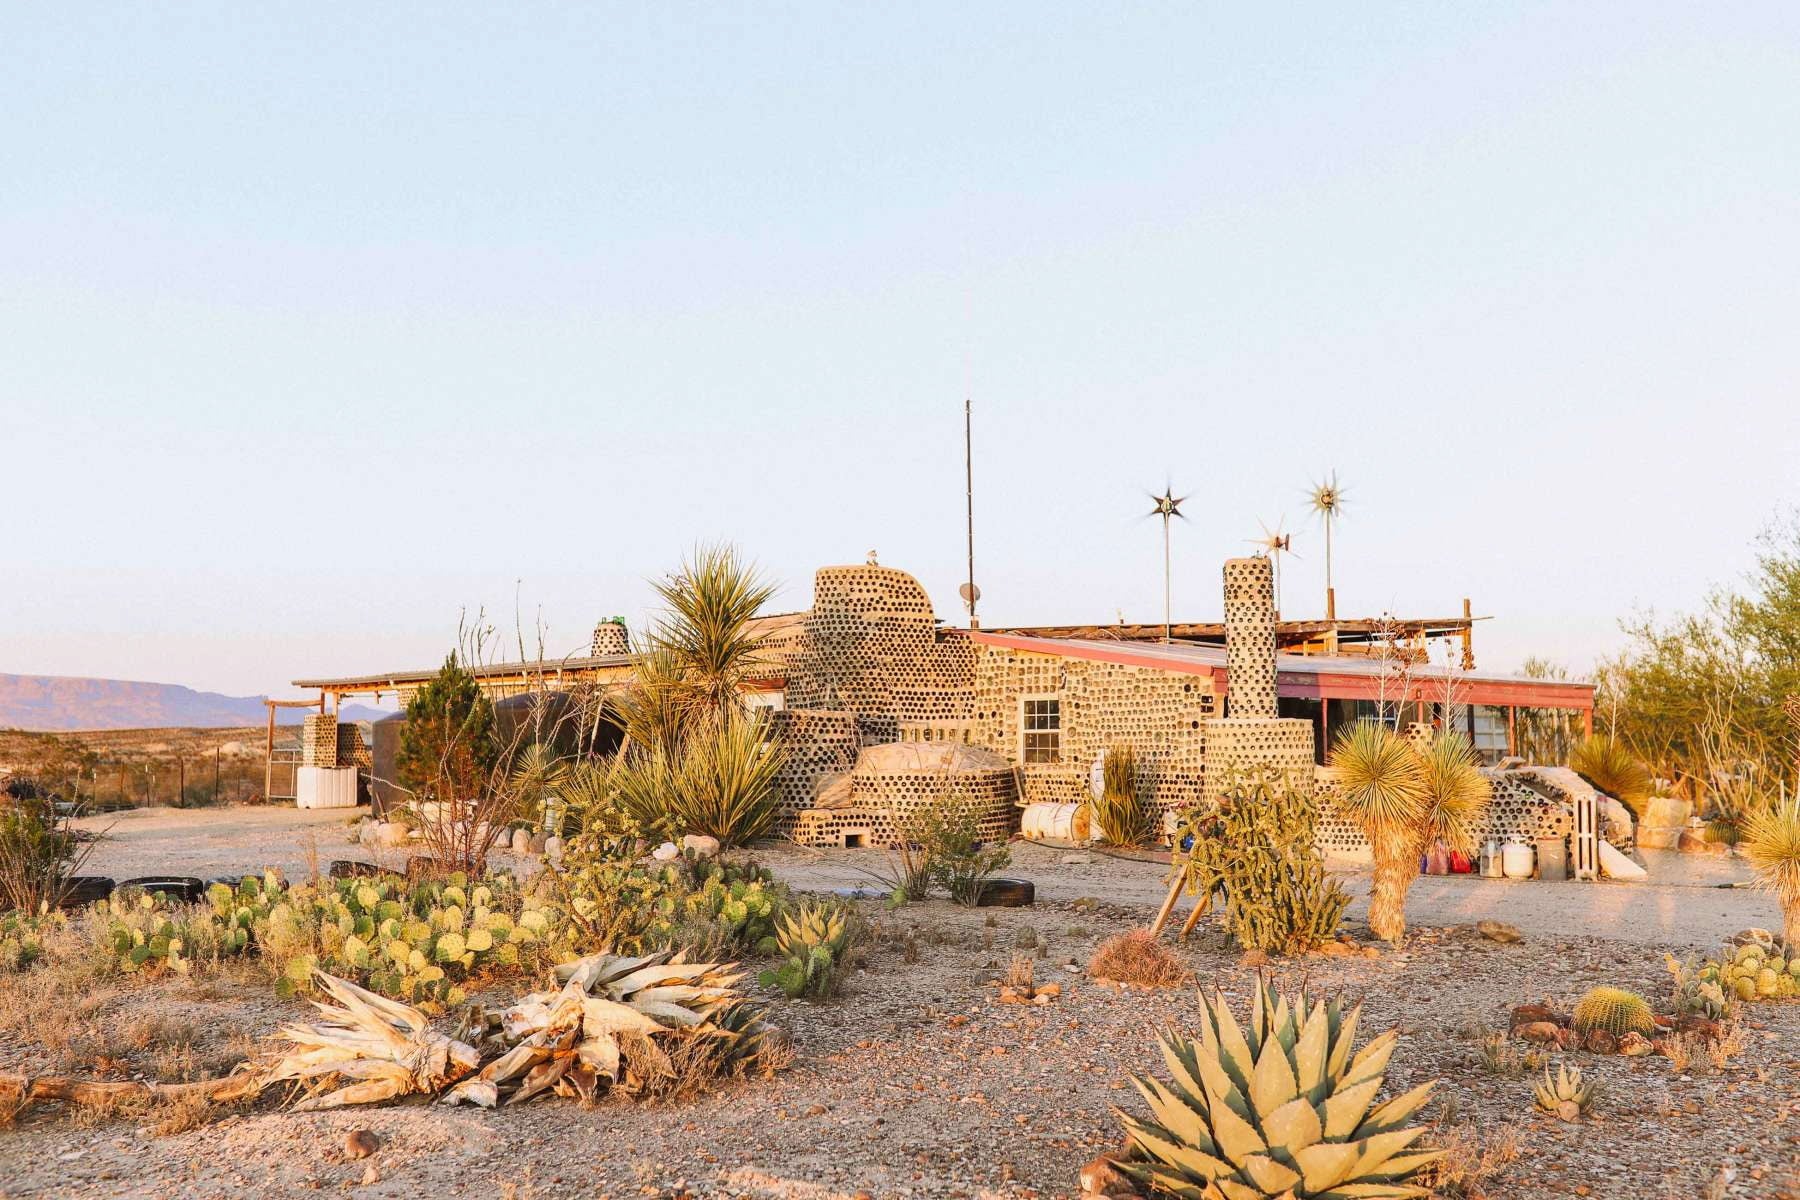 Eco ranch main cabin made out of recycled materials in the desert.